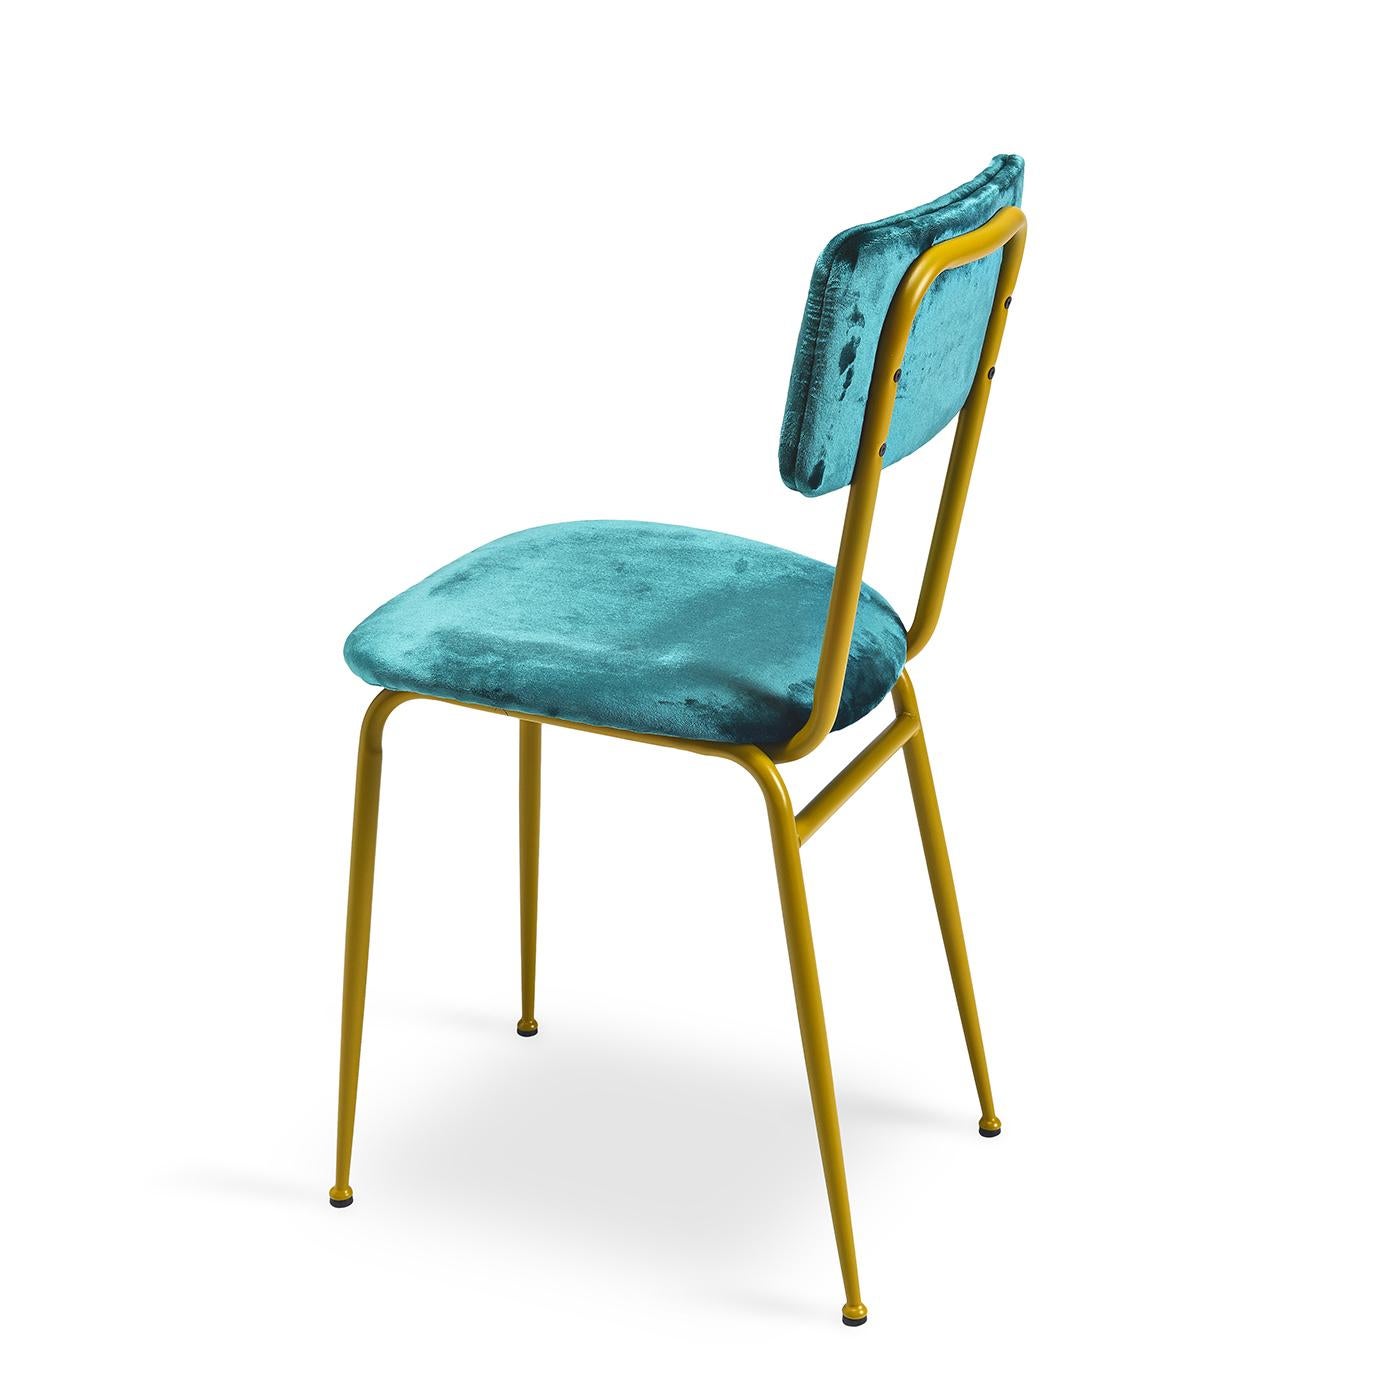 Add a touch of glam to your modern living space with the Miss Gina 1 chair. Boasting a sleek meal frame with a brushed copper finish, this stylish piece is upholstered in luxurious teal velvet. Padding in the seat and backrest ensures optimal